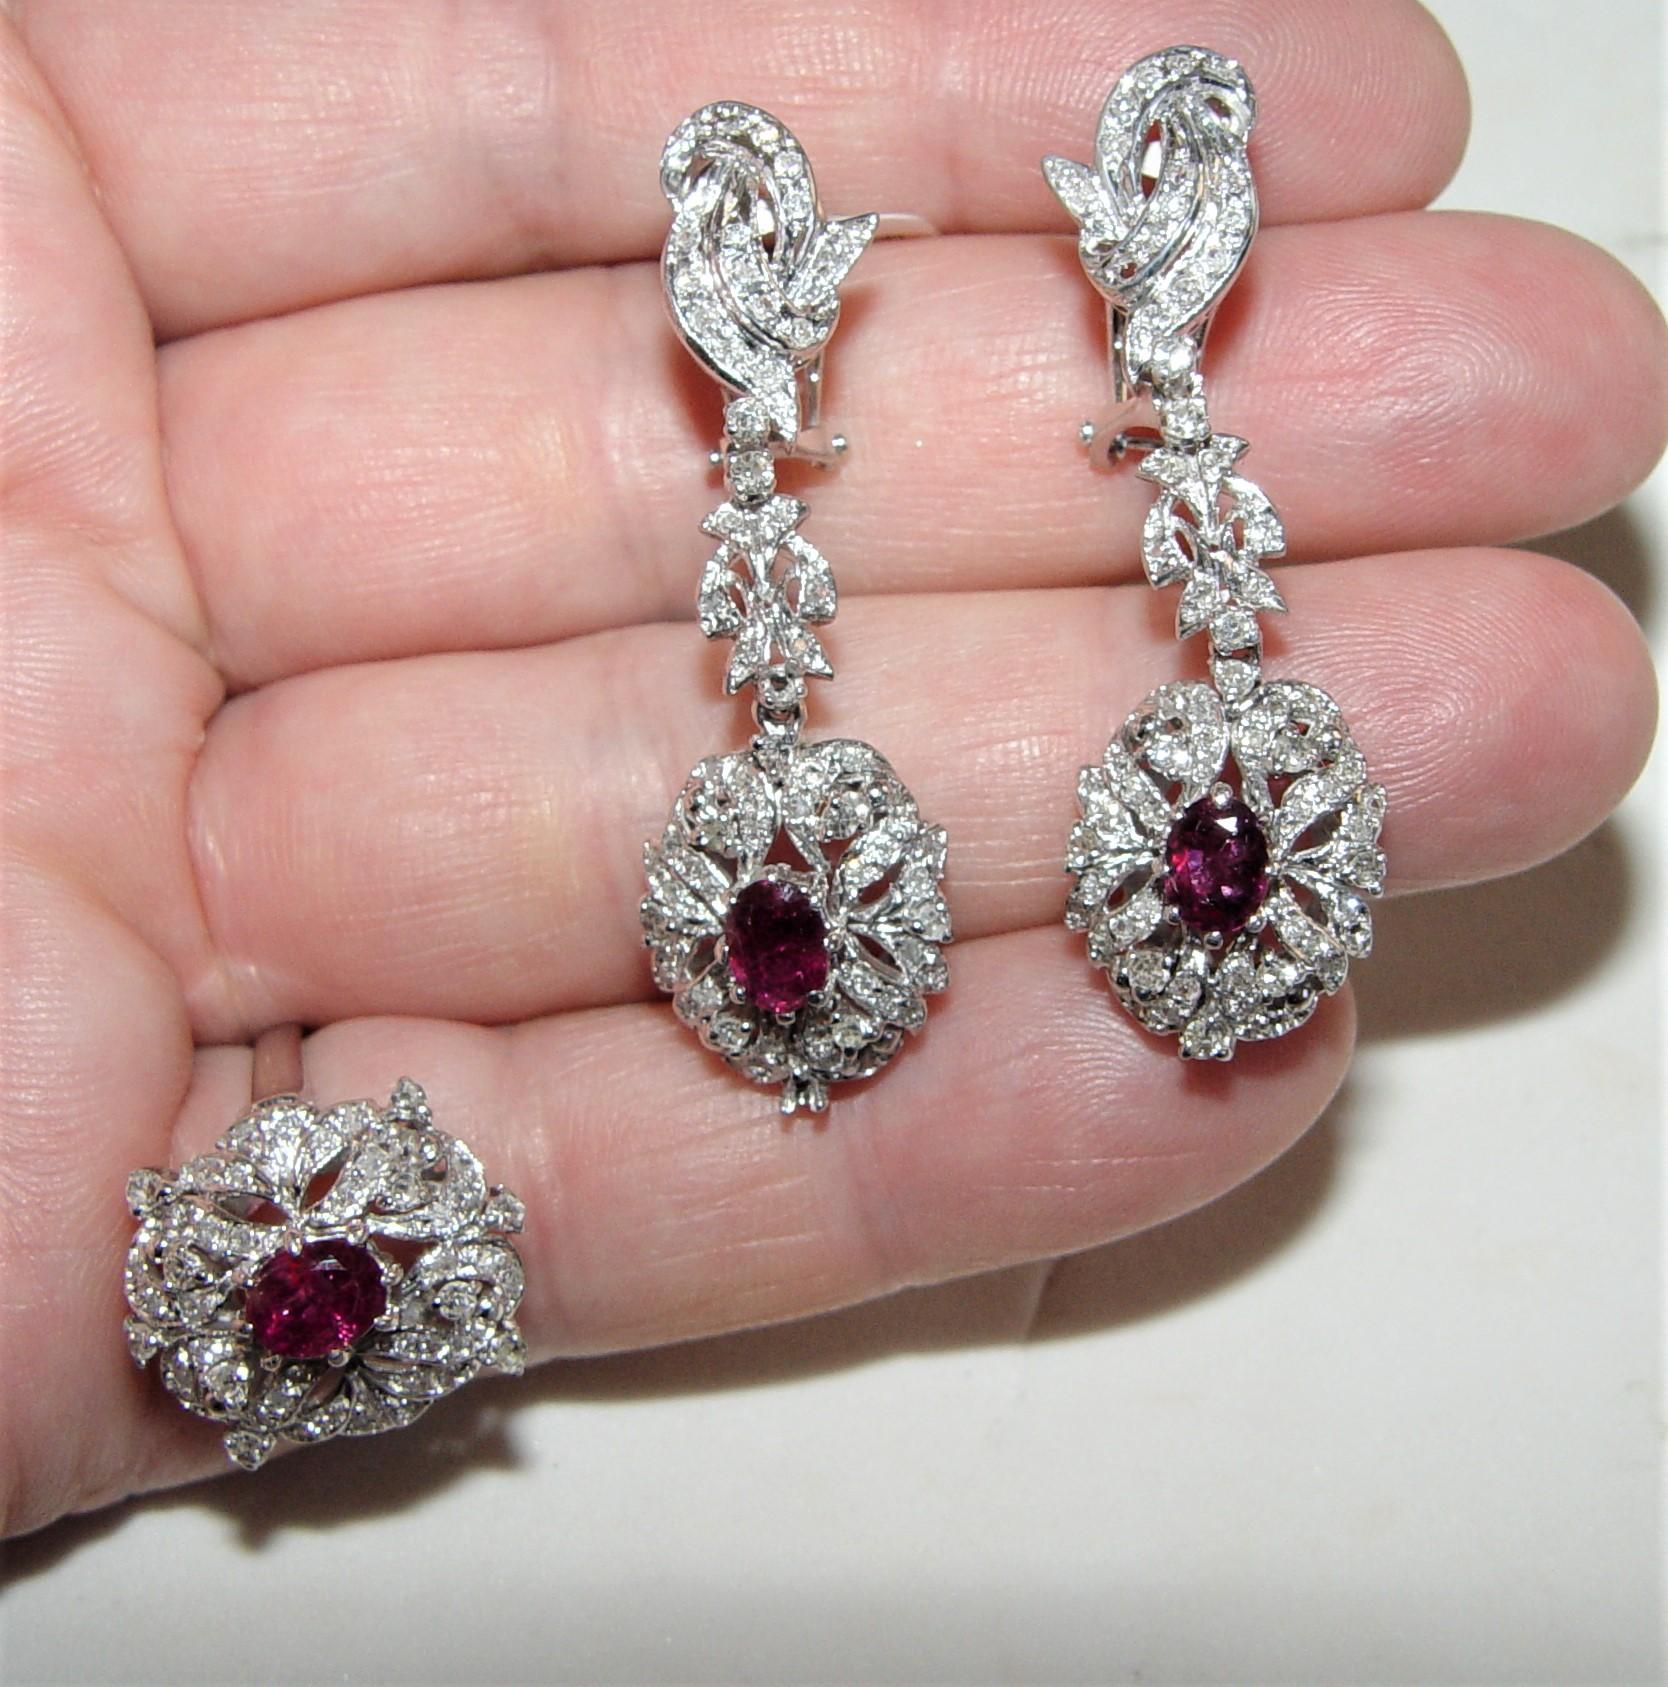 Beautiful Art Deco style filigree earrings/ring set most likely South American reproduction. Ring and earrings encrusted with single cut natural diamonds - we estimate 1.50CT total weight (measuring from 1.5 to 2.0MM in diameter. H-I in color SI1-I1